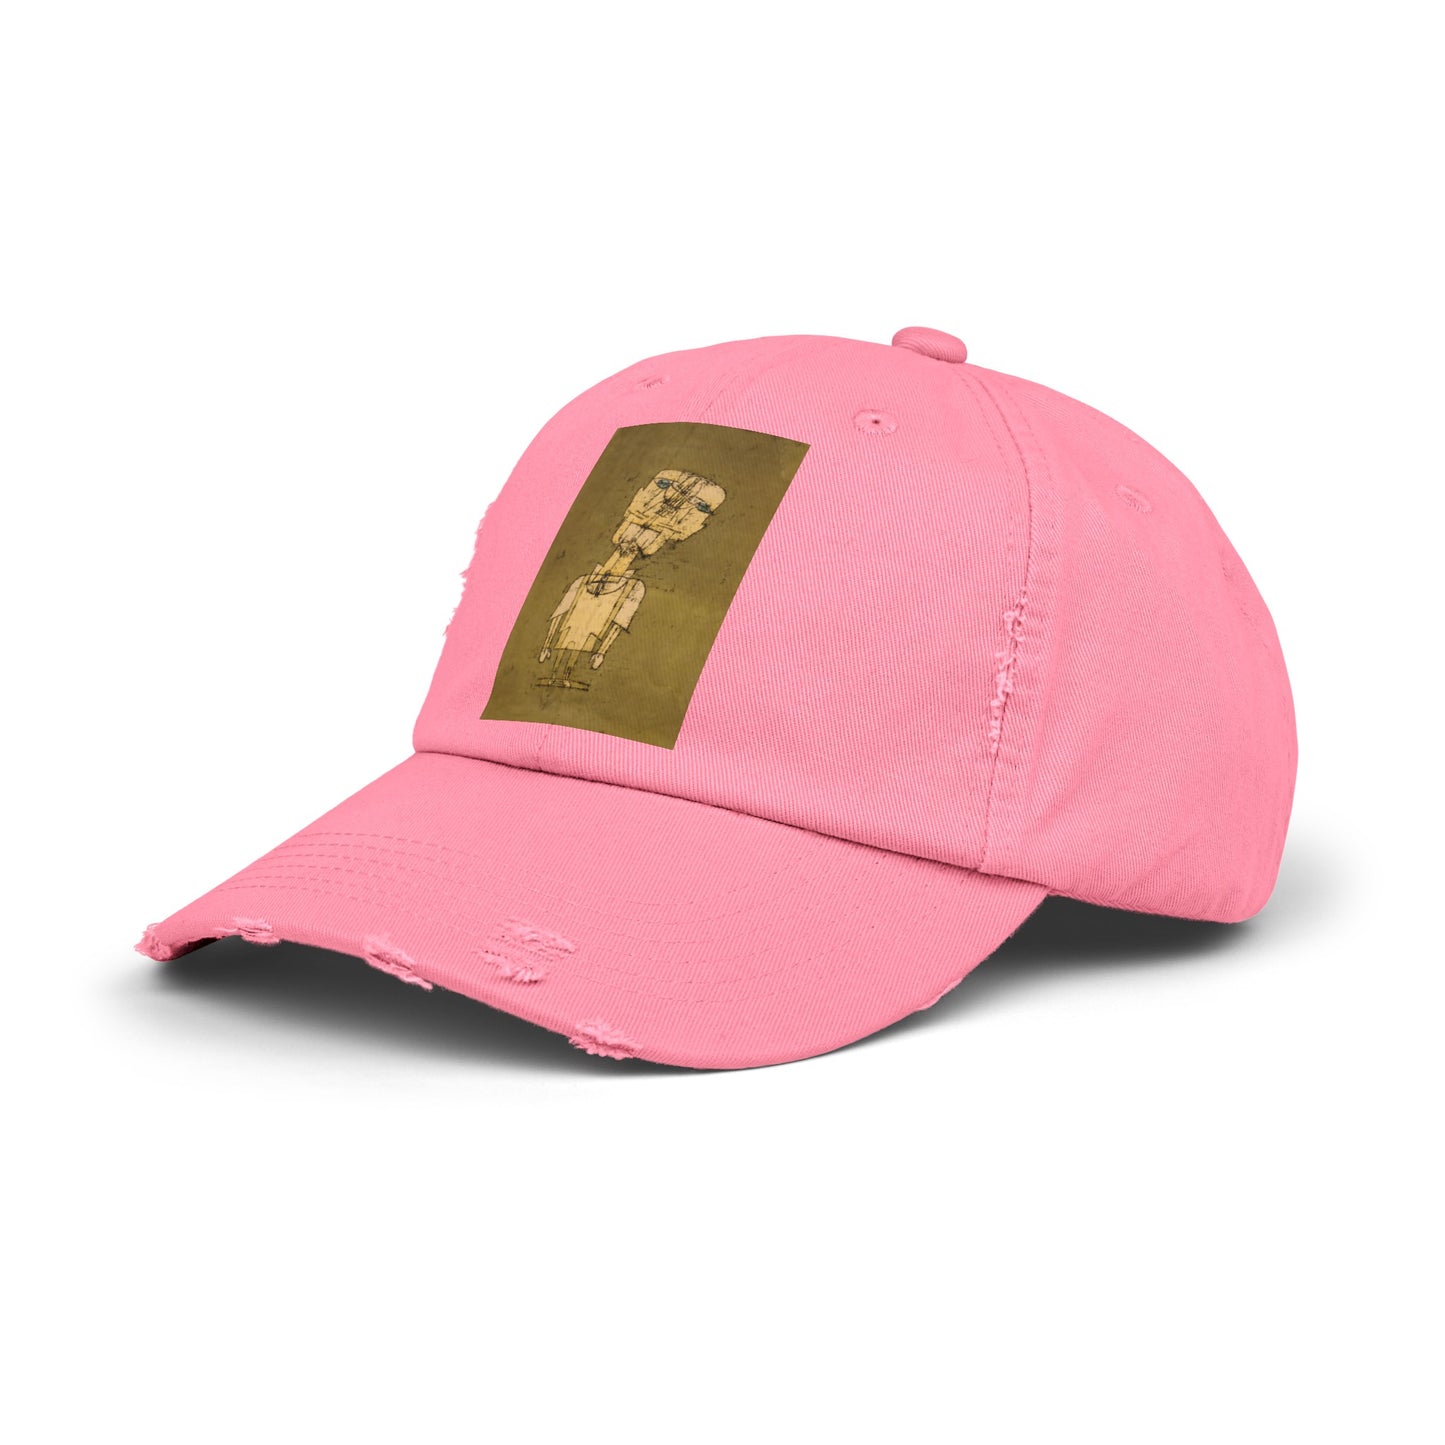 a pink hat with a picture of a woman on it